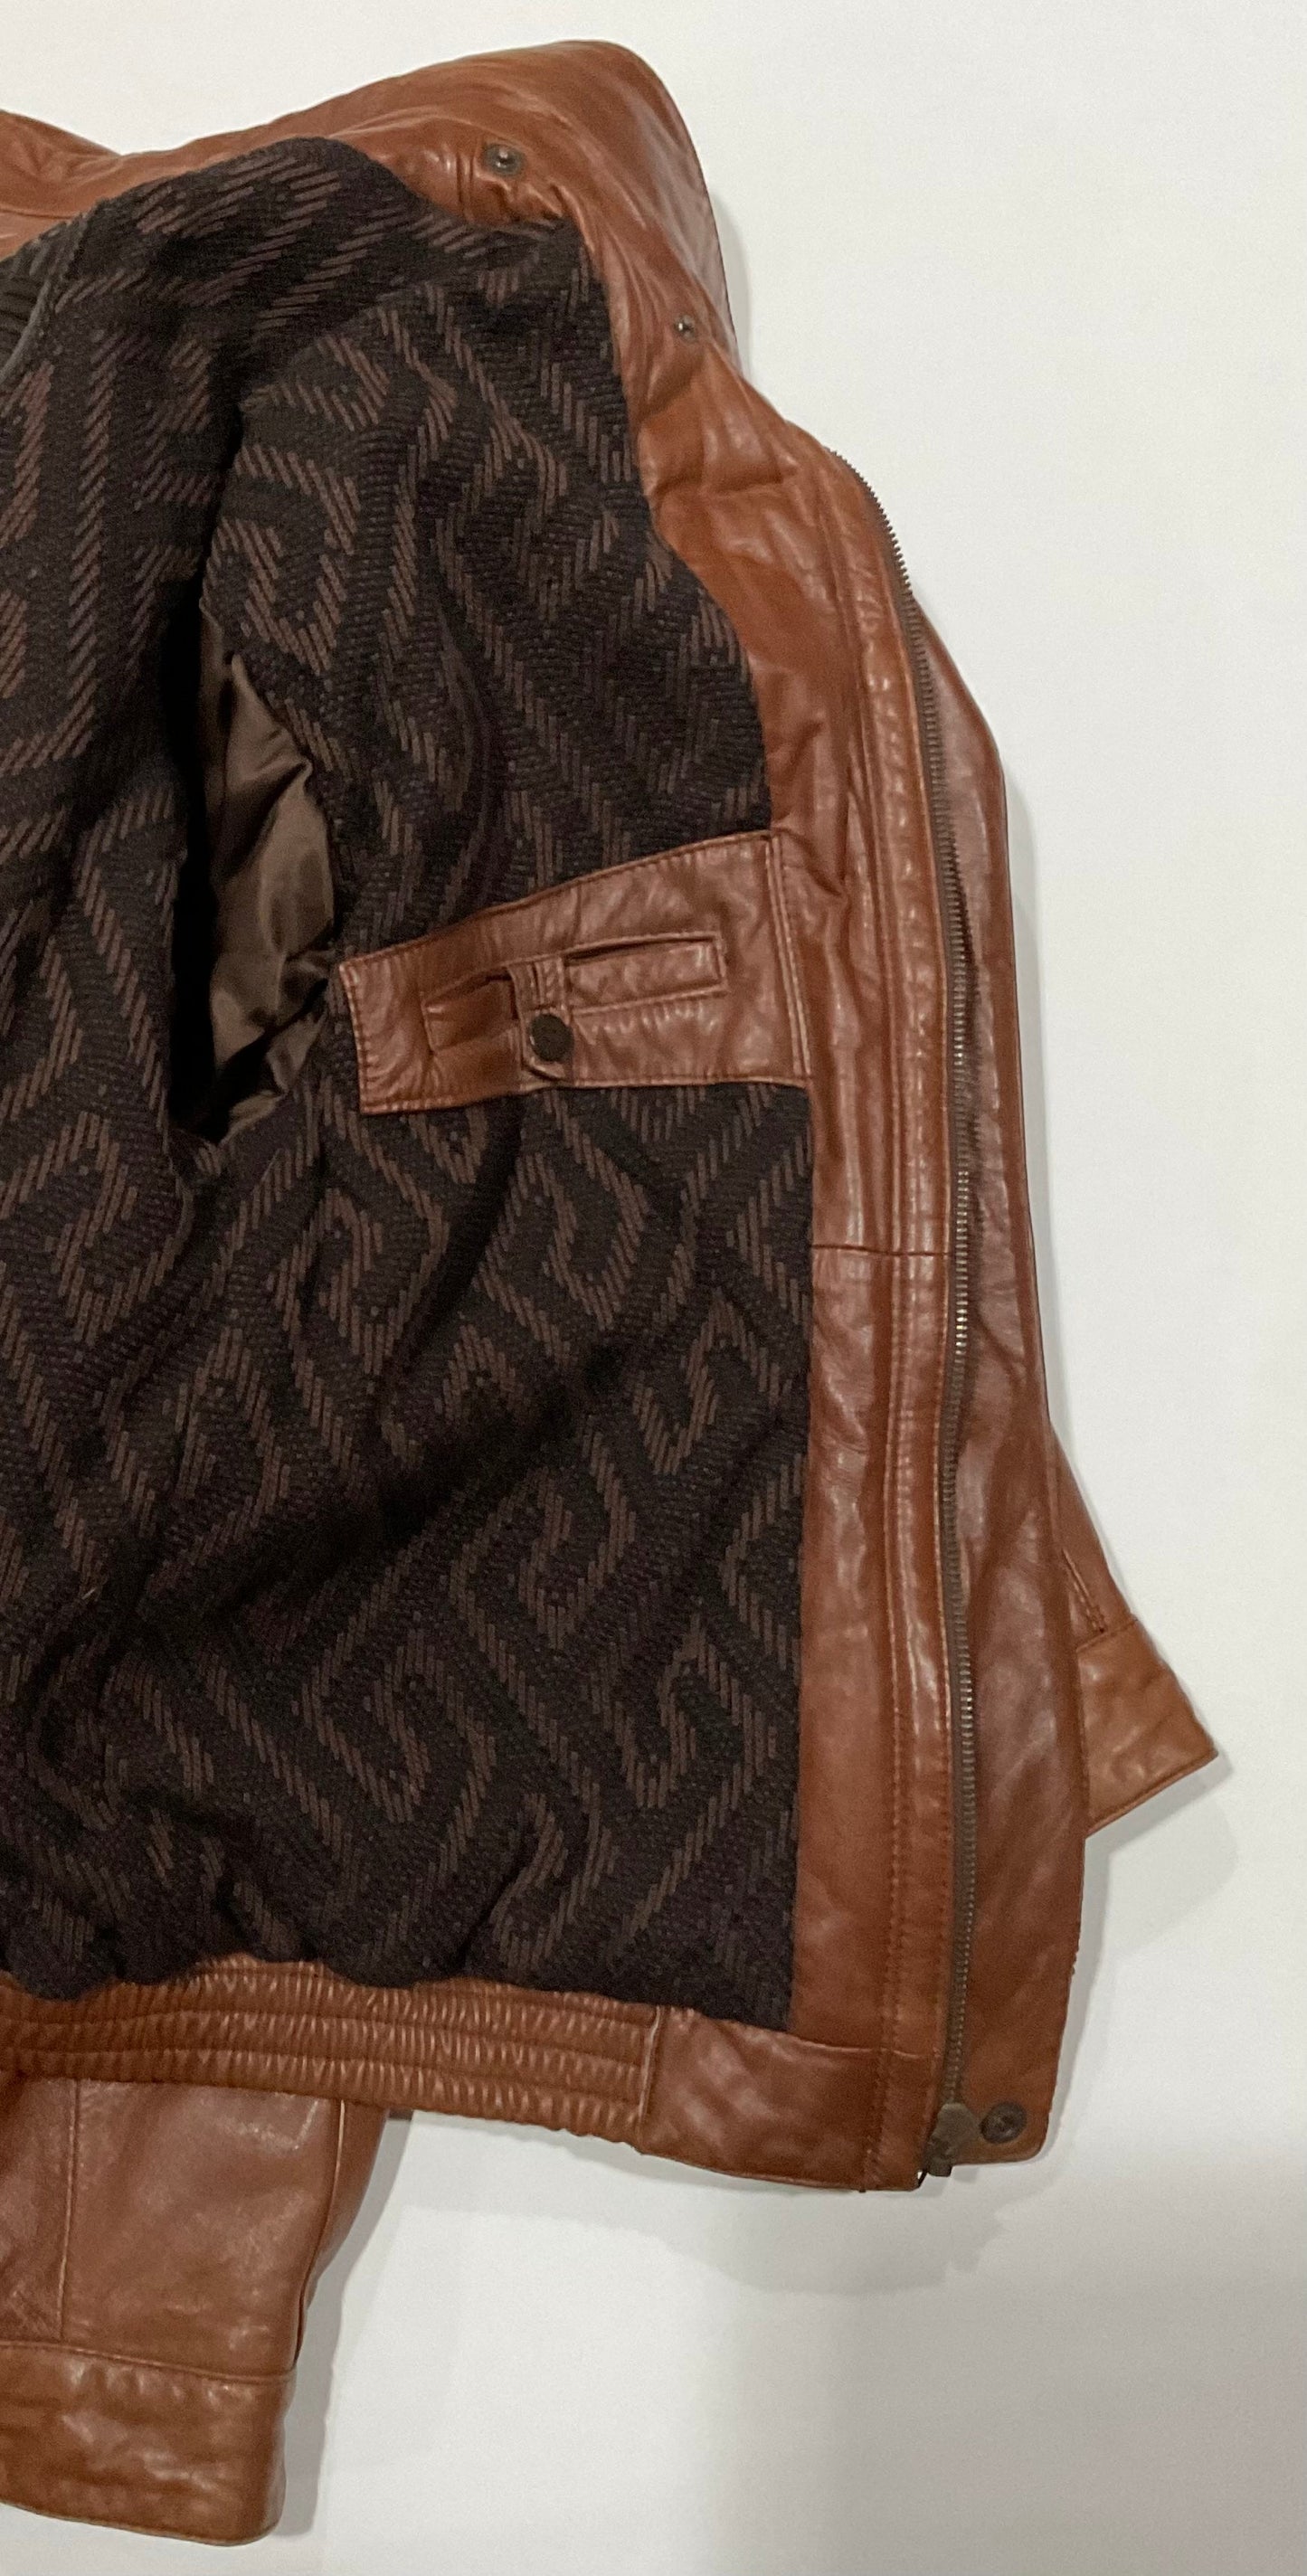 R P LEATHER JACKET / BROWN RUST / MEDIUM / REMOVABLE COLLAR / MADE IN SPAIN